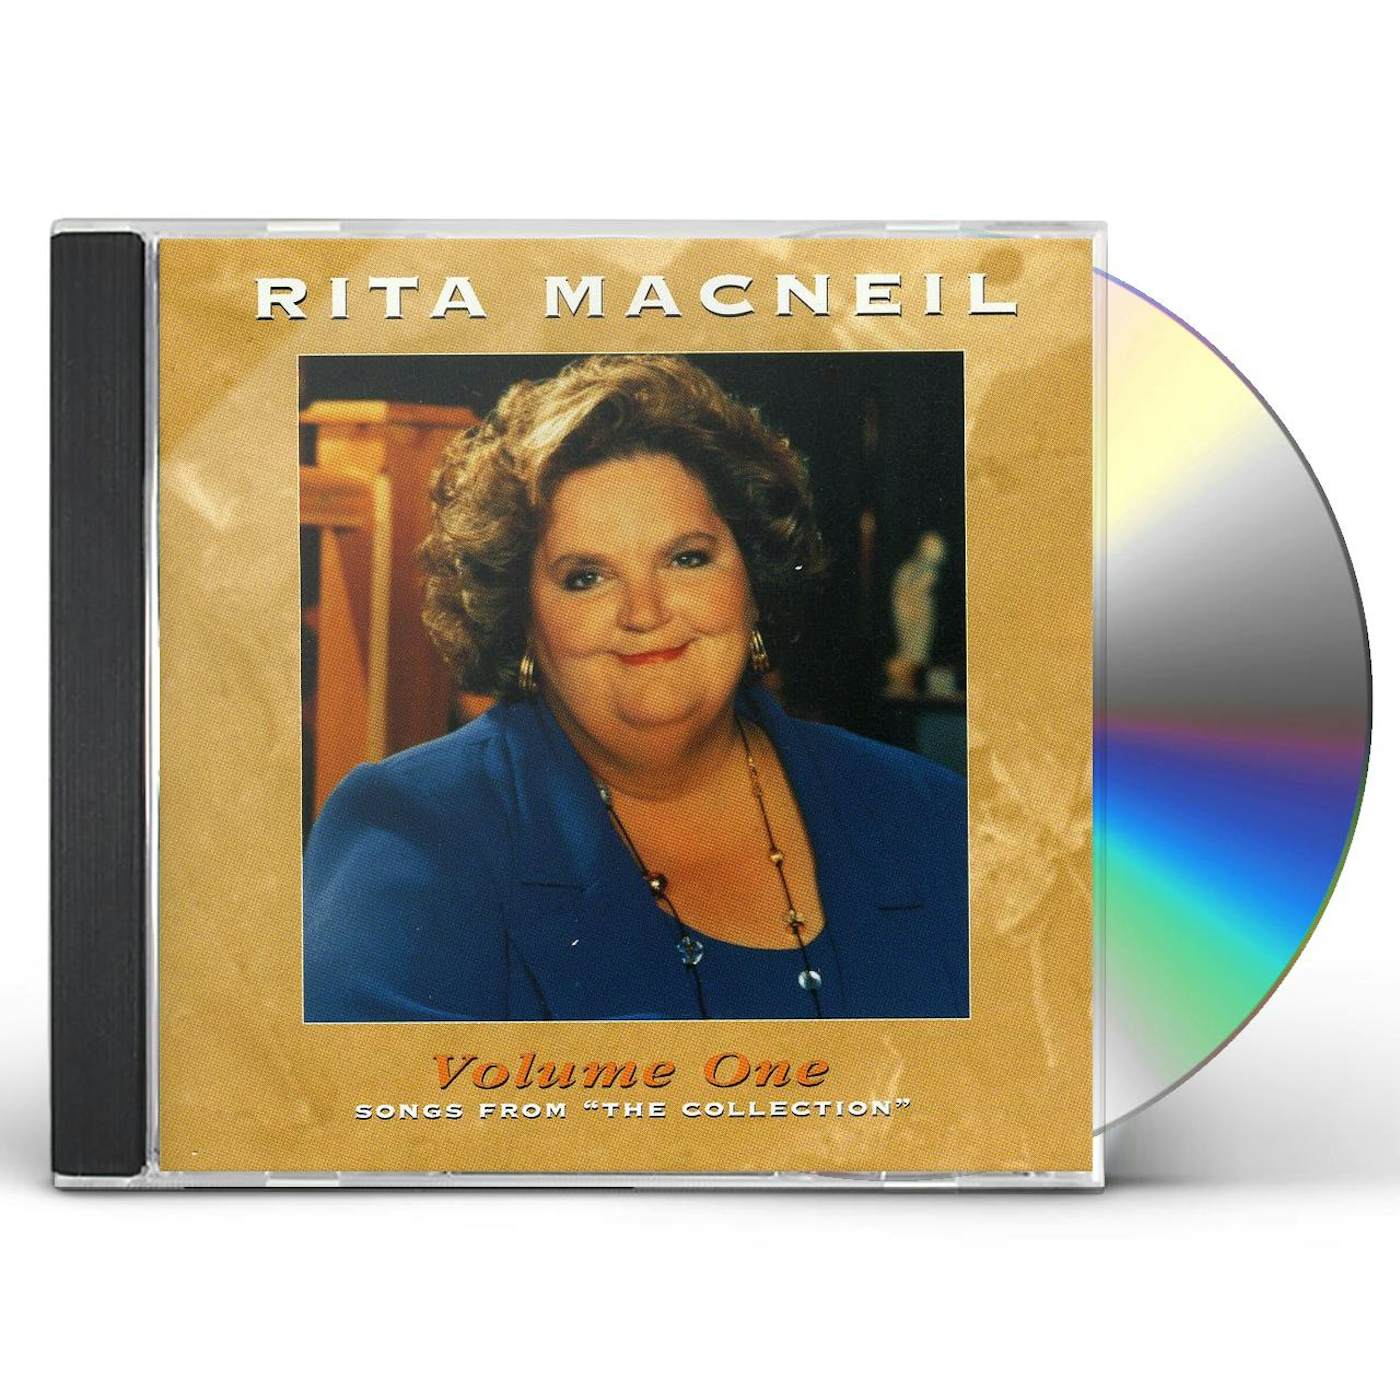 Rita MacNeil SONGS FROM THE COLLECTION 1 CD